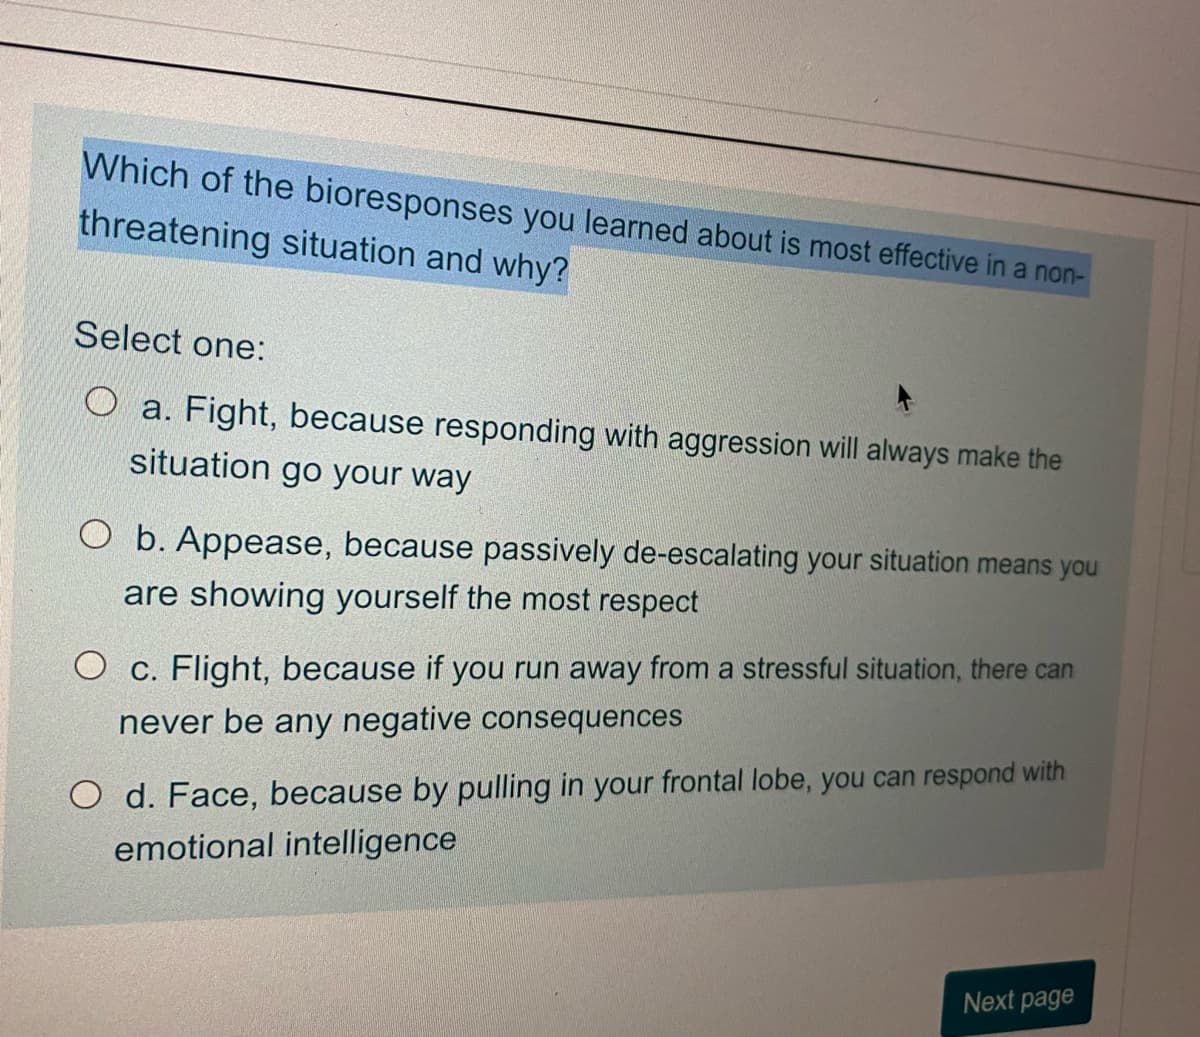 Which of the bioresponses you learned about is most effective in a non-
threatening situation and why?
Select one:
Oa. Fight, because responding with aggression will always make the
situation go your way
O b. Appease, because passively de-escalating your situation means you
are showing yourself the most respect
O c. Flight, because if you run away from a stressful situation, there can
never be any negative consequences
O d. Face, because by pulling in your frontal lobe, you can respond with
emotional intelligence
Next page